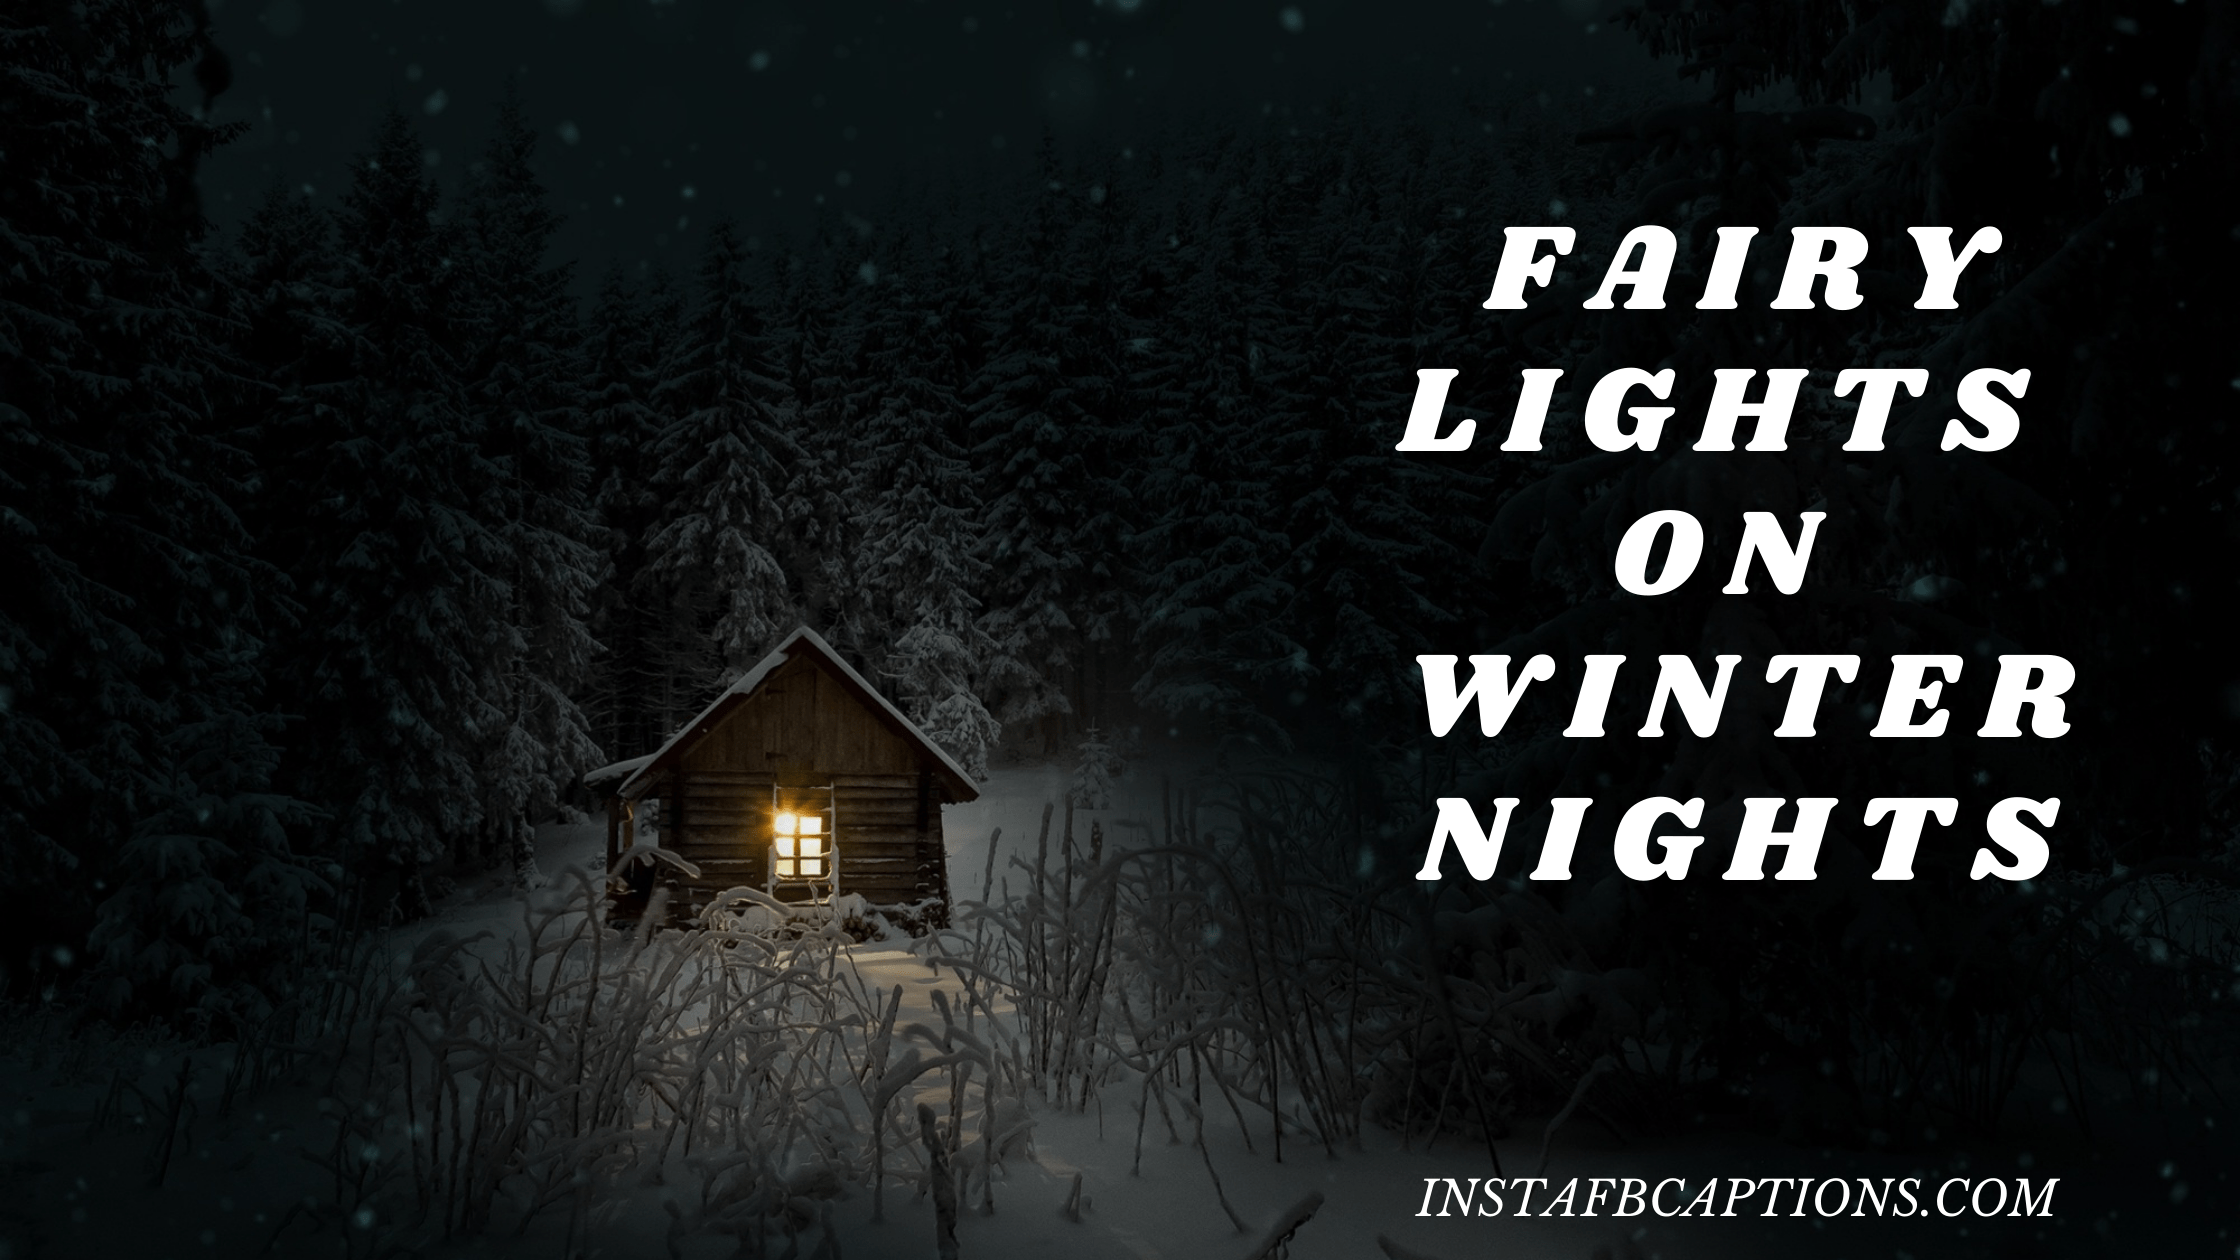 Fairy lights on winter nights  - Winter Night Captions for Instagram - Peaceful 120+ Night Captions For Instagram In 2022